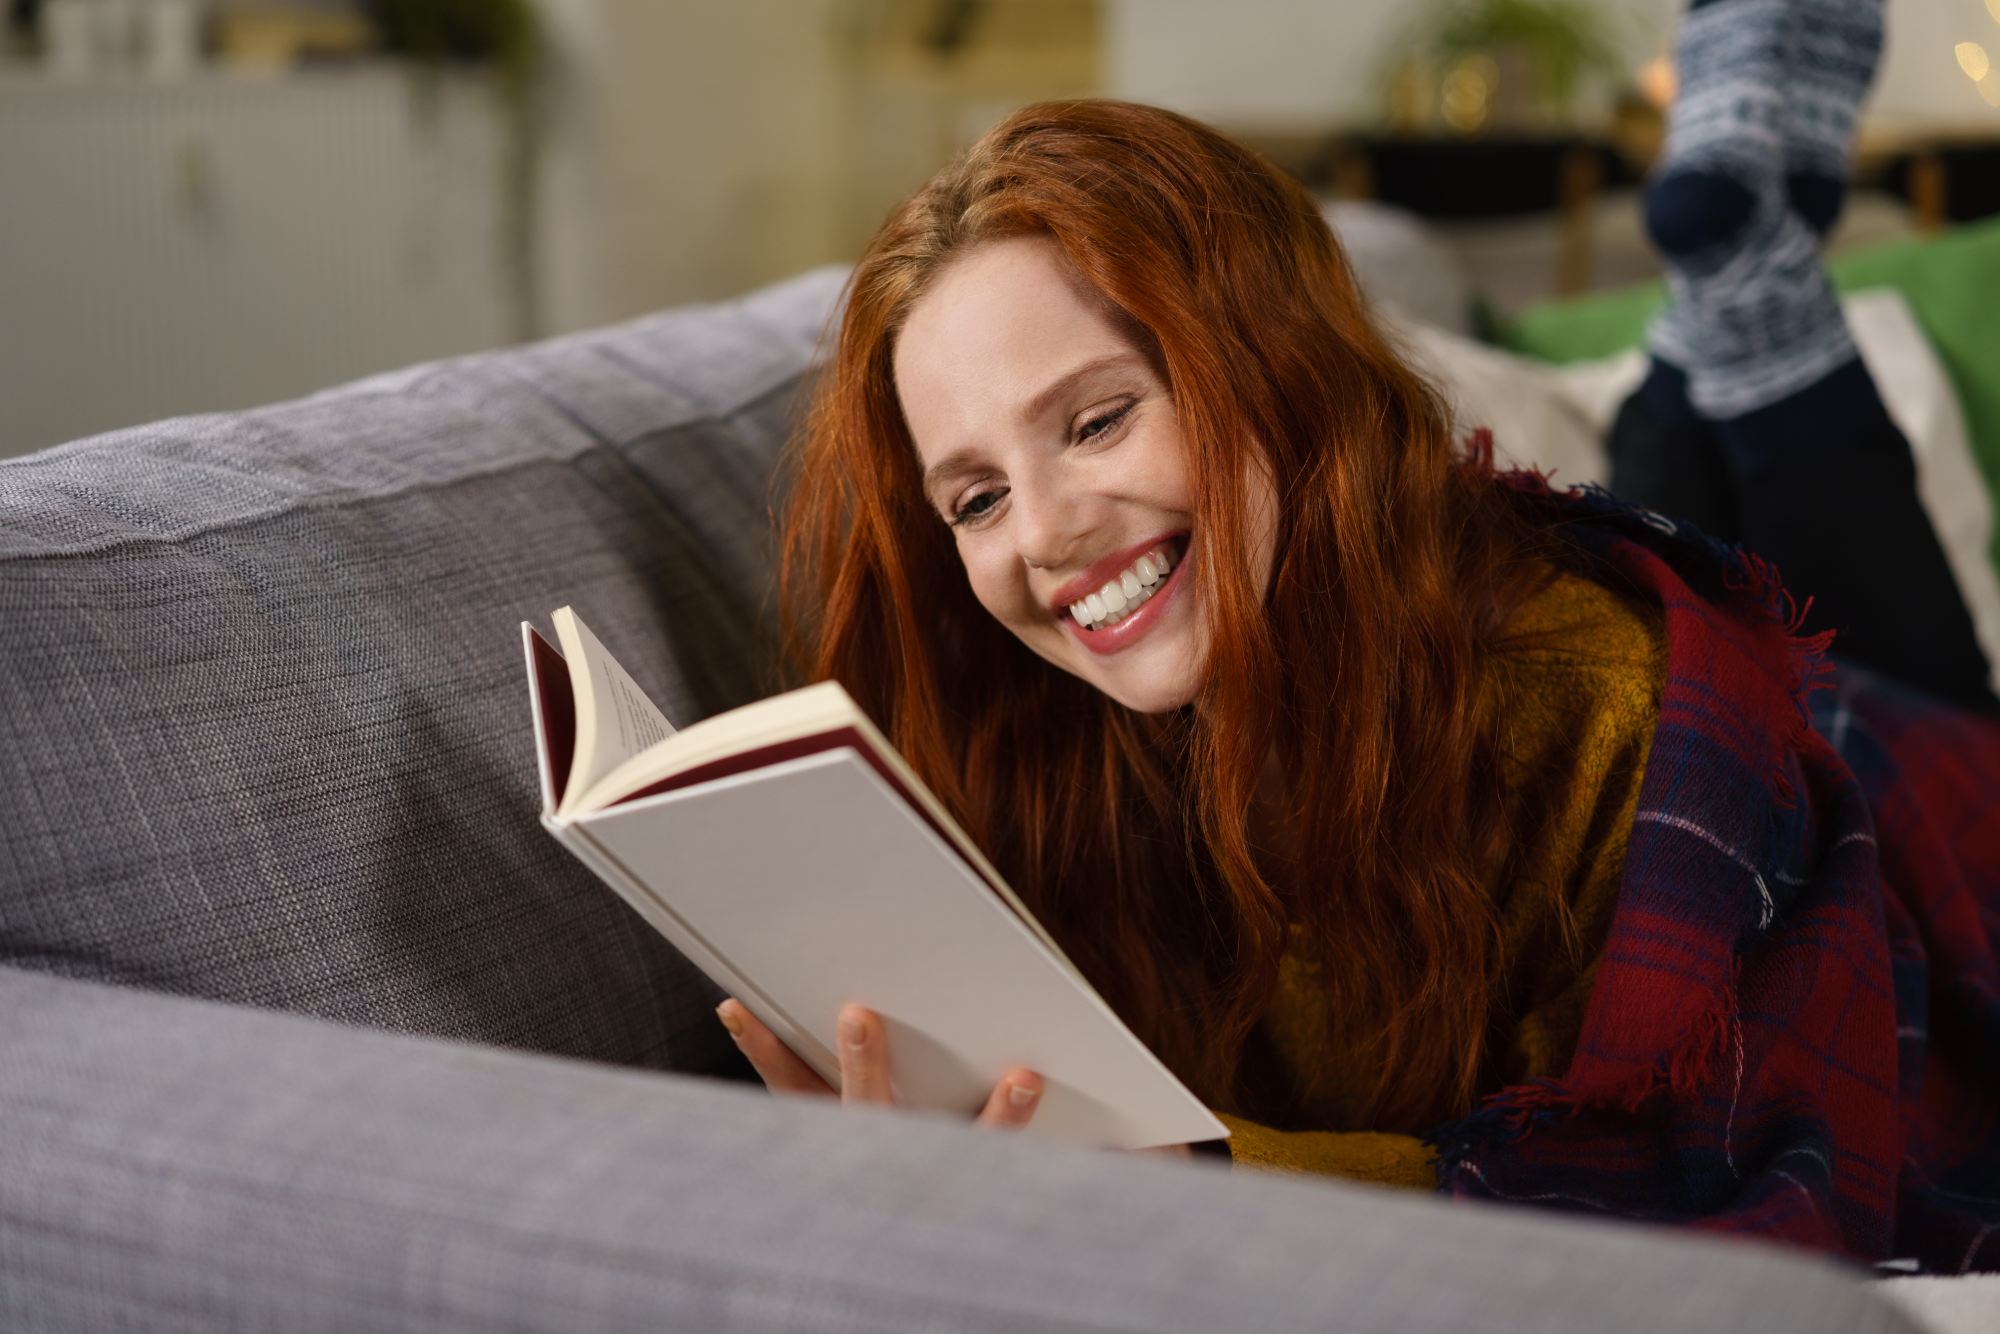 redheaded woman laughing while reading a book